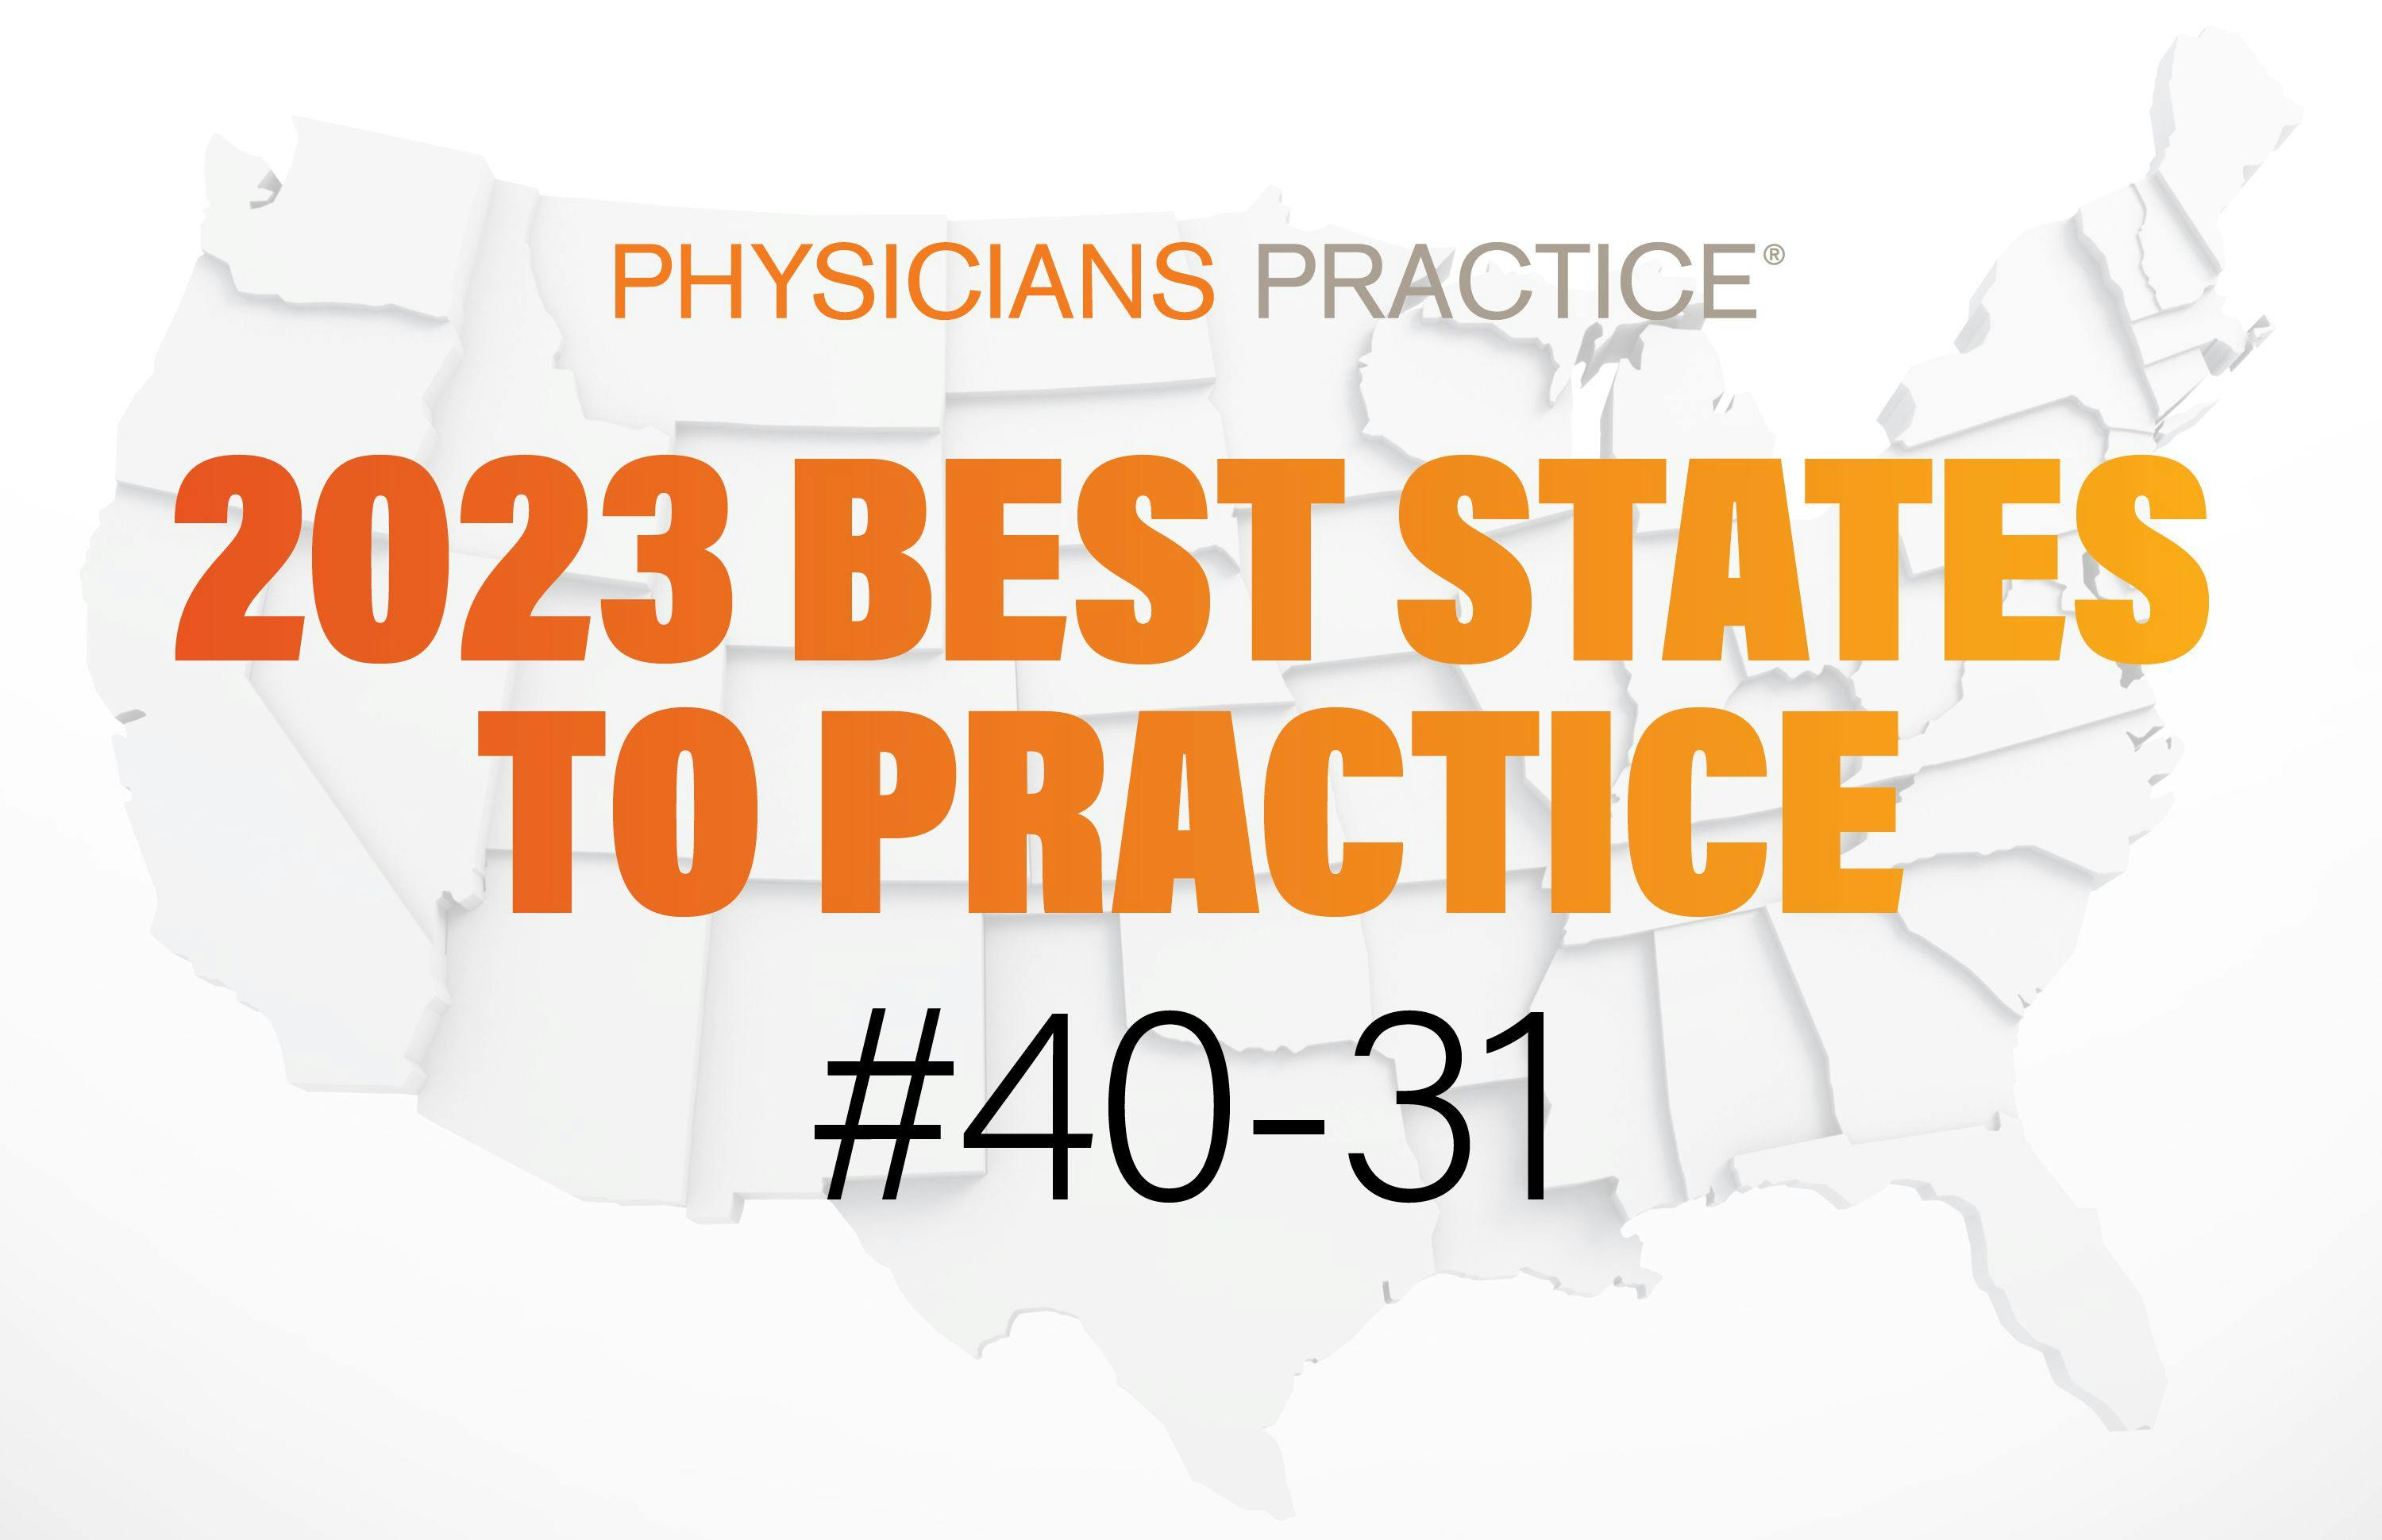 2023 Physicians Practice best states to practice: 40-31